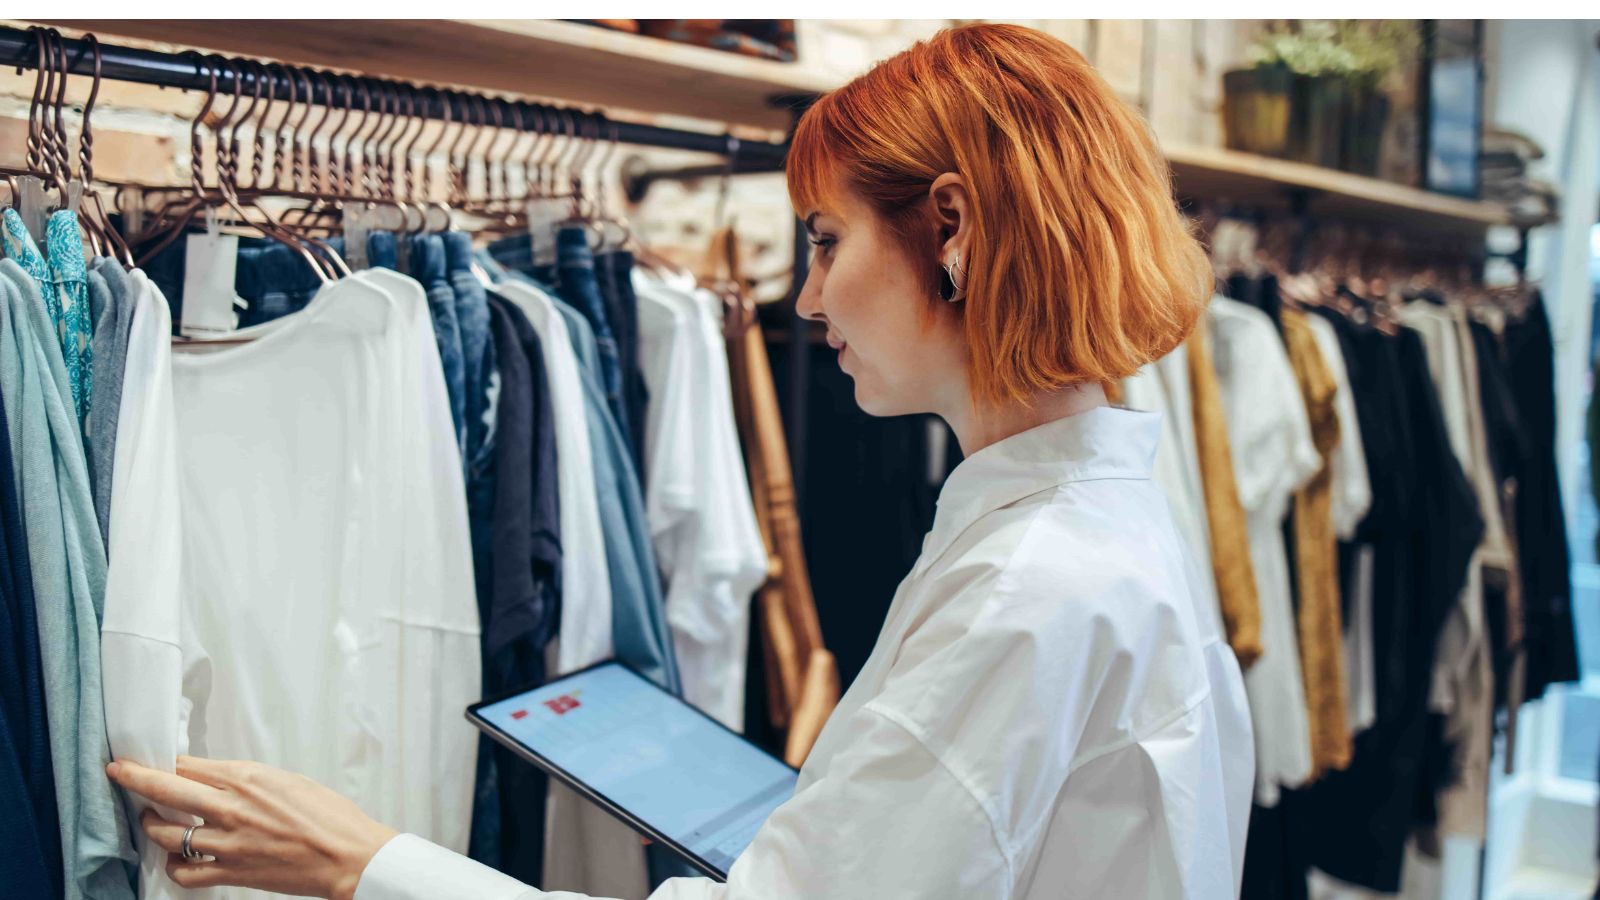 Retail inventory management is an important aspect of any retail business.